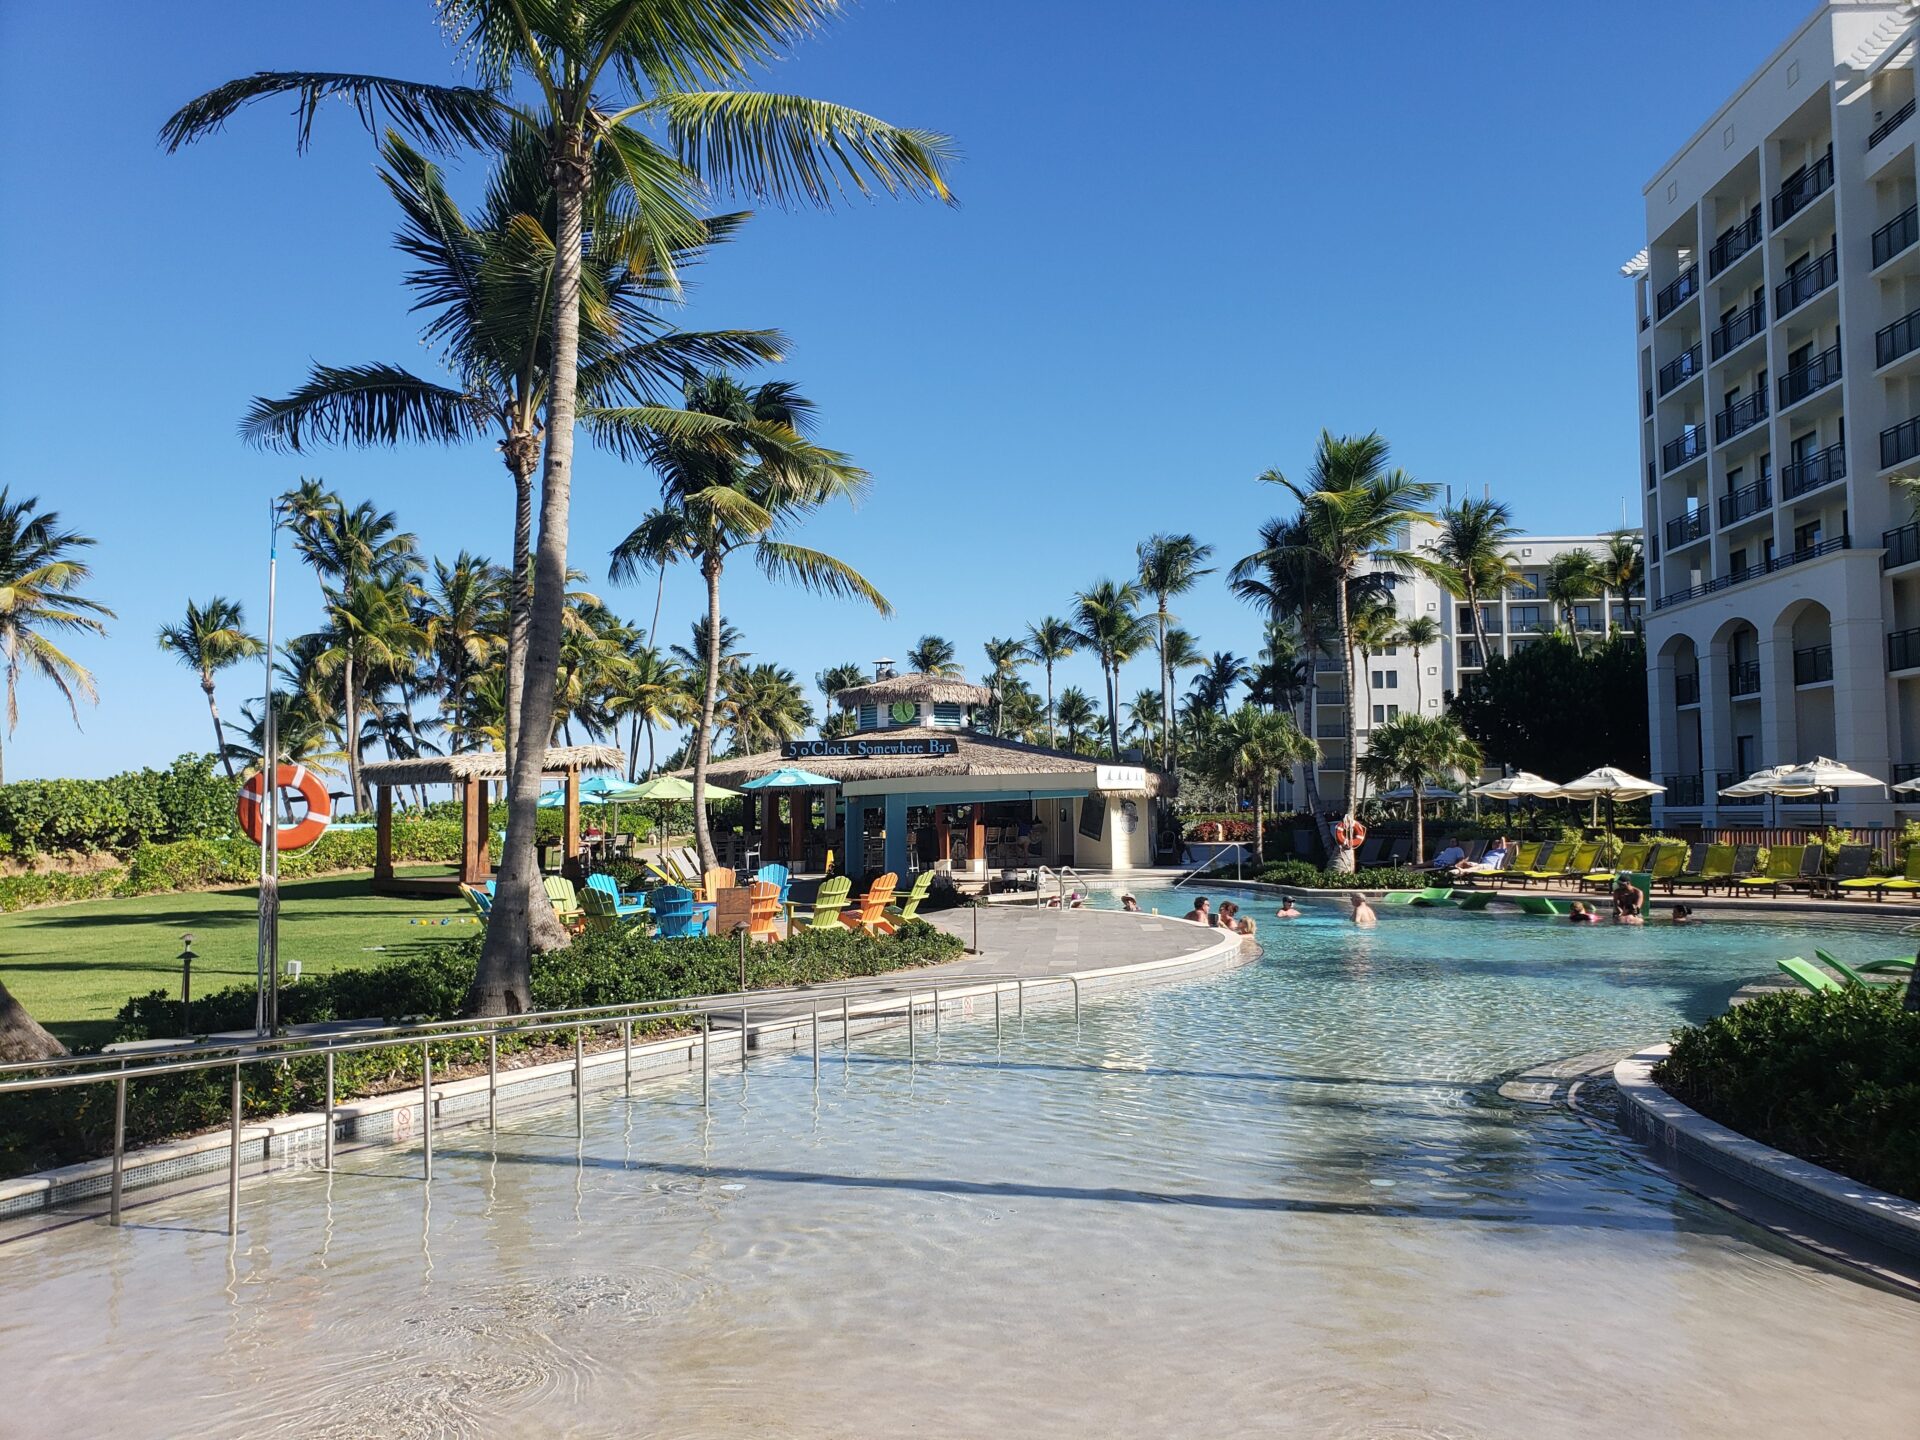 a pool with palm trees and buildings